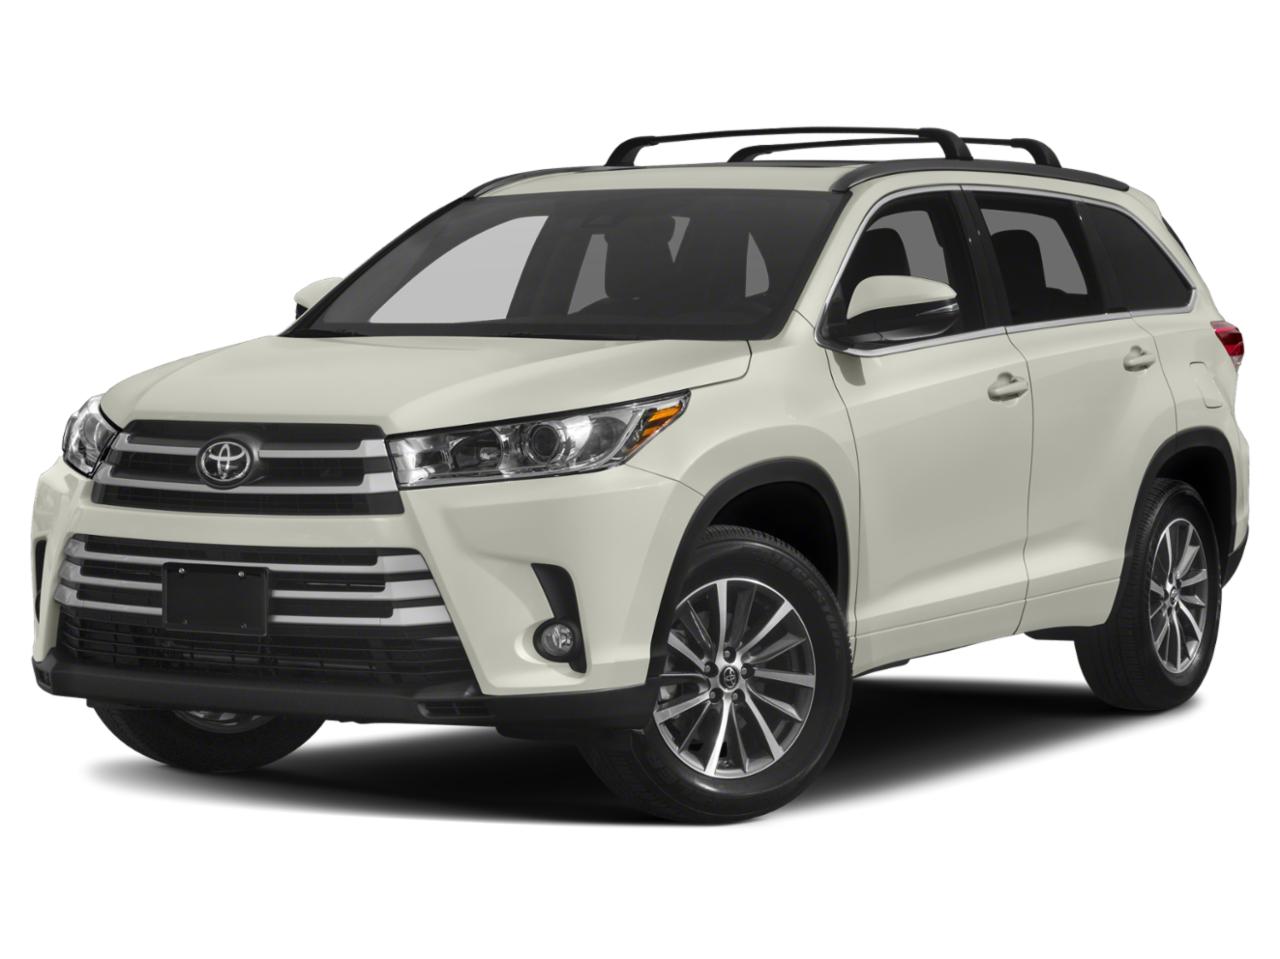 2019 Toyota Highlander Vehicle Photo in Willow Grove, PA 19090